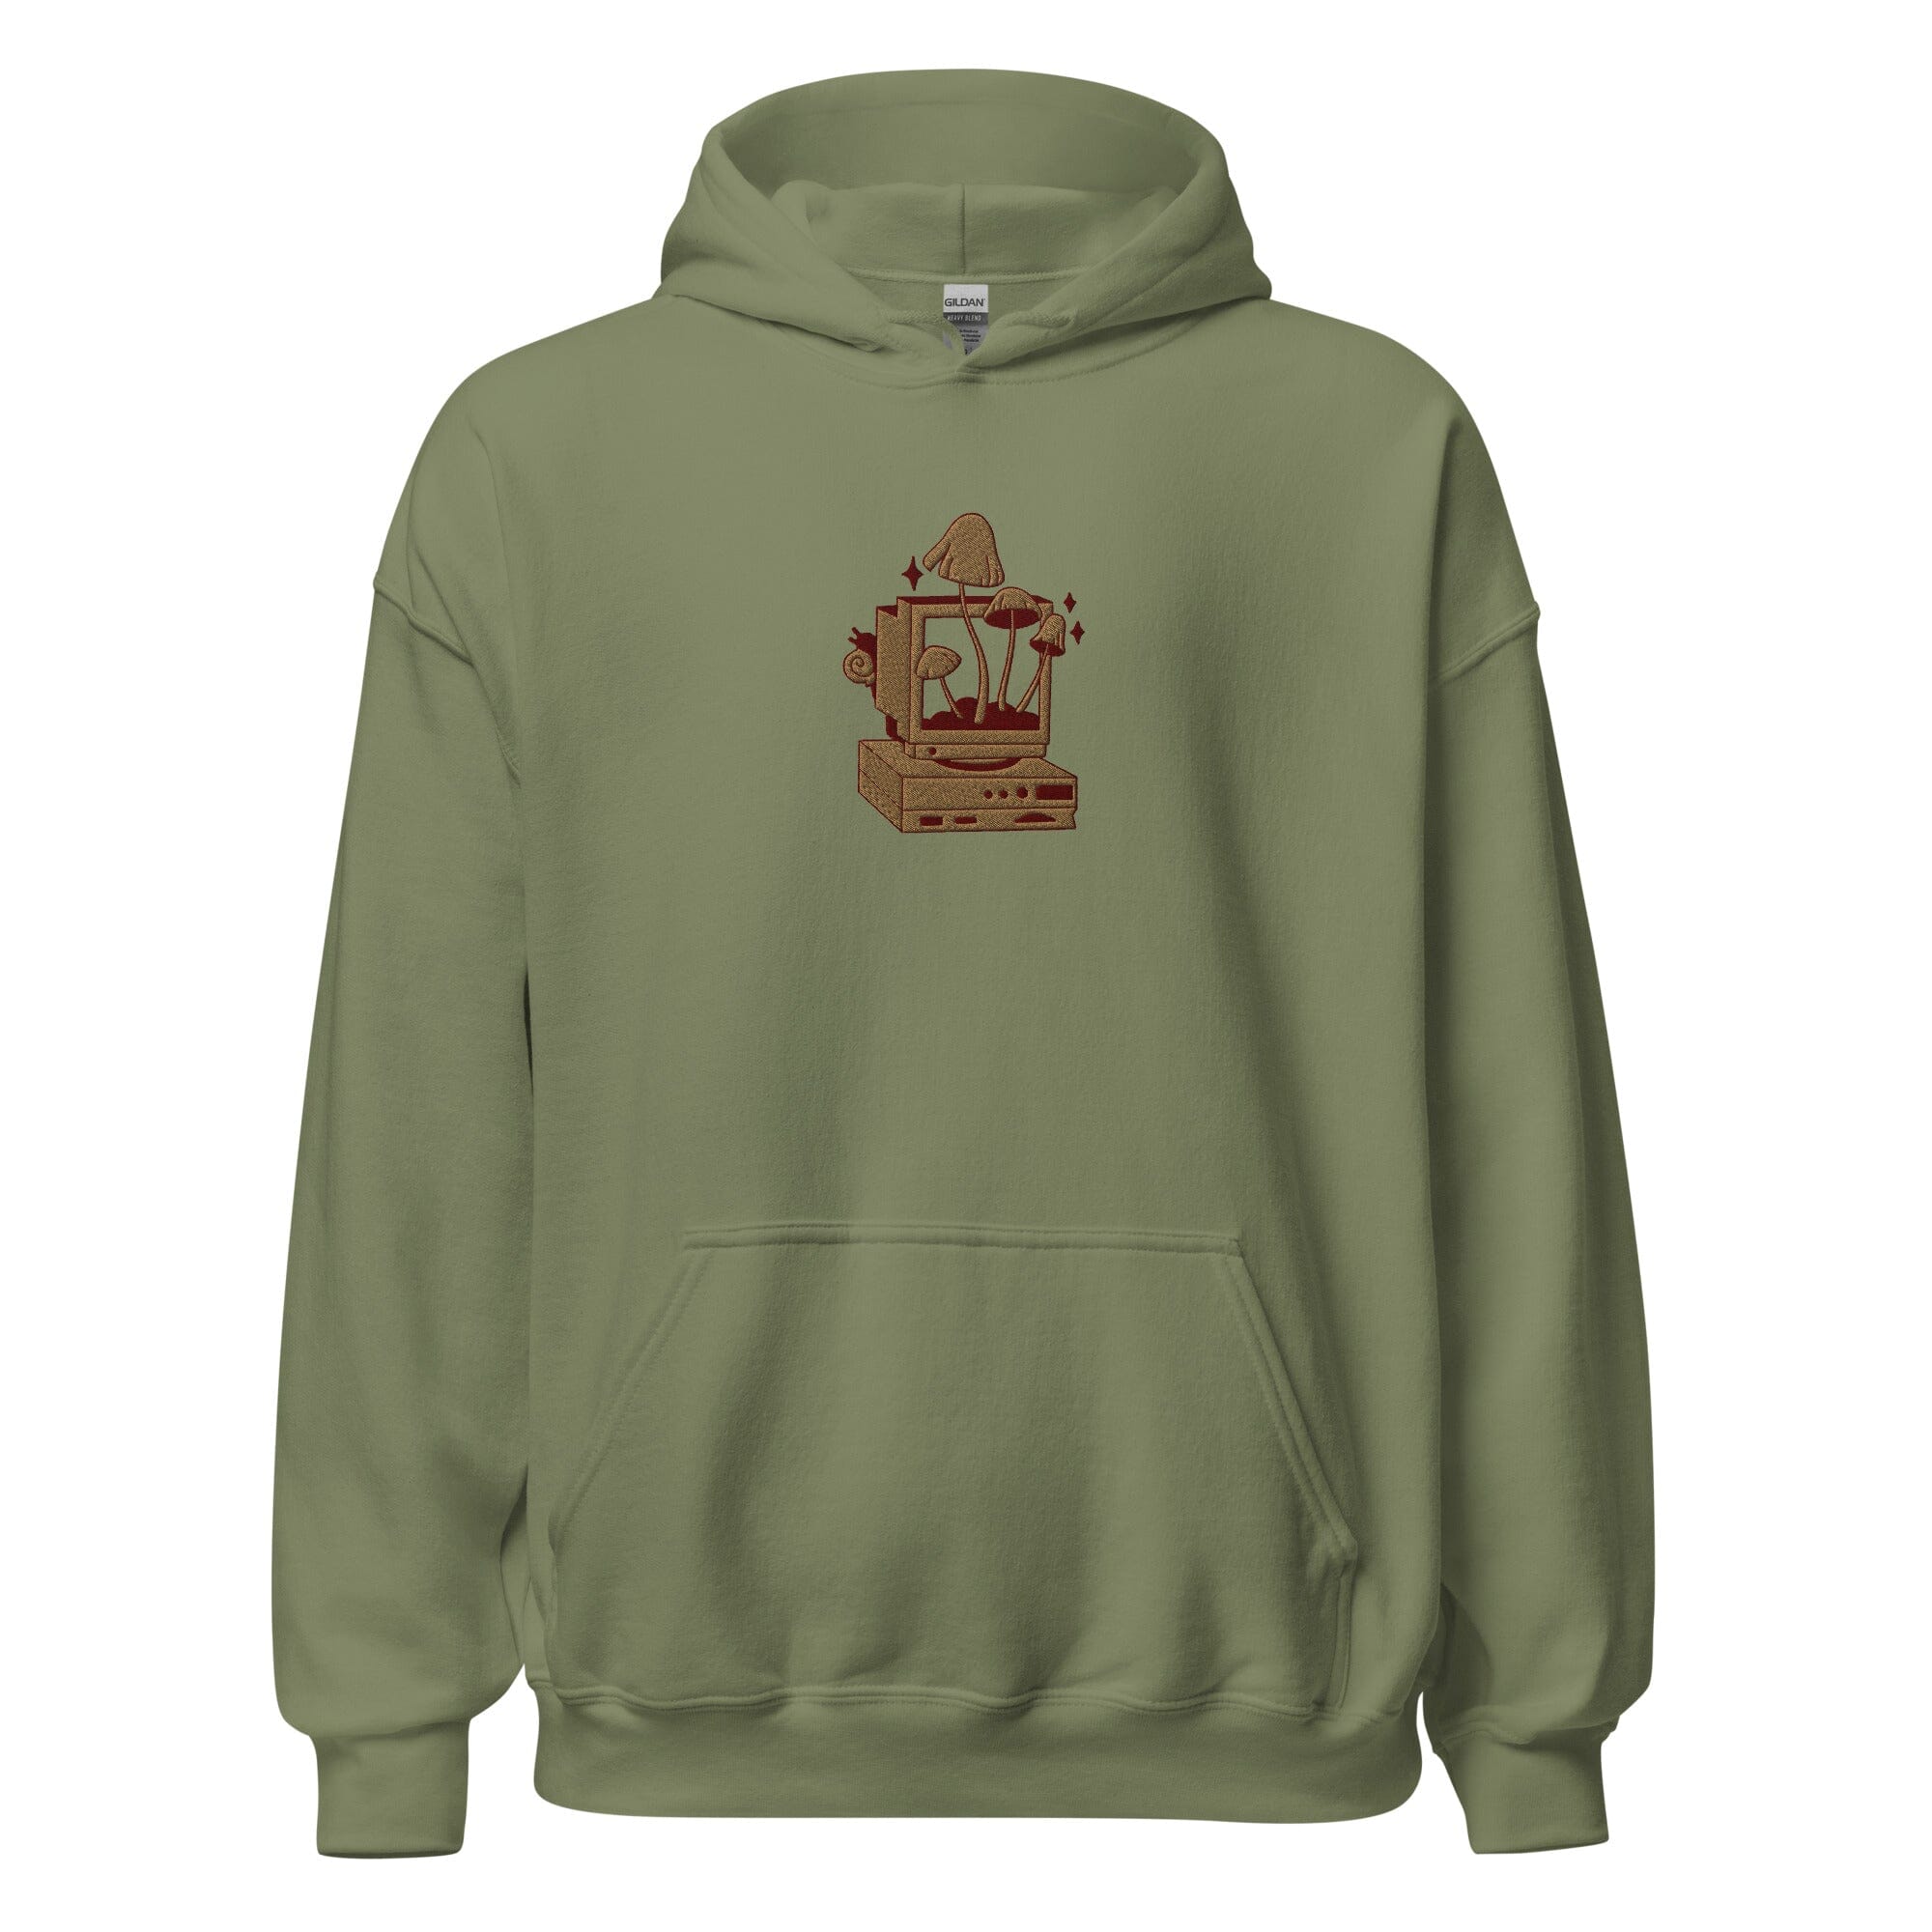 Cozy PC Gaming | Embroidered Unisex Hoodie | Cozy Gamer Threads & Thistles Inventory Military Green S 